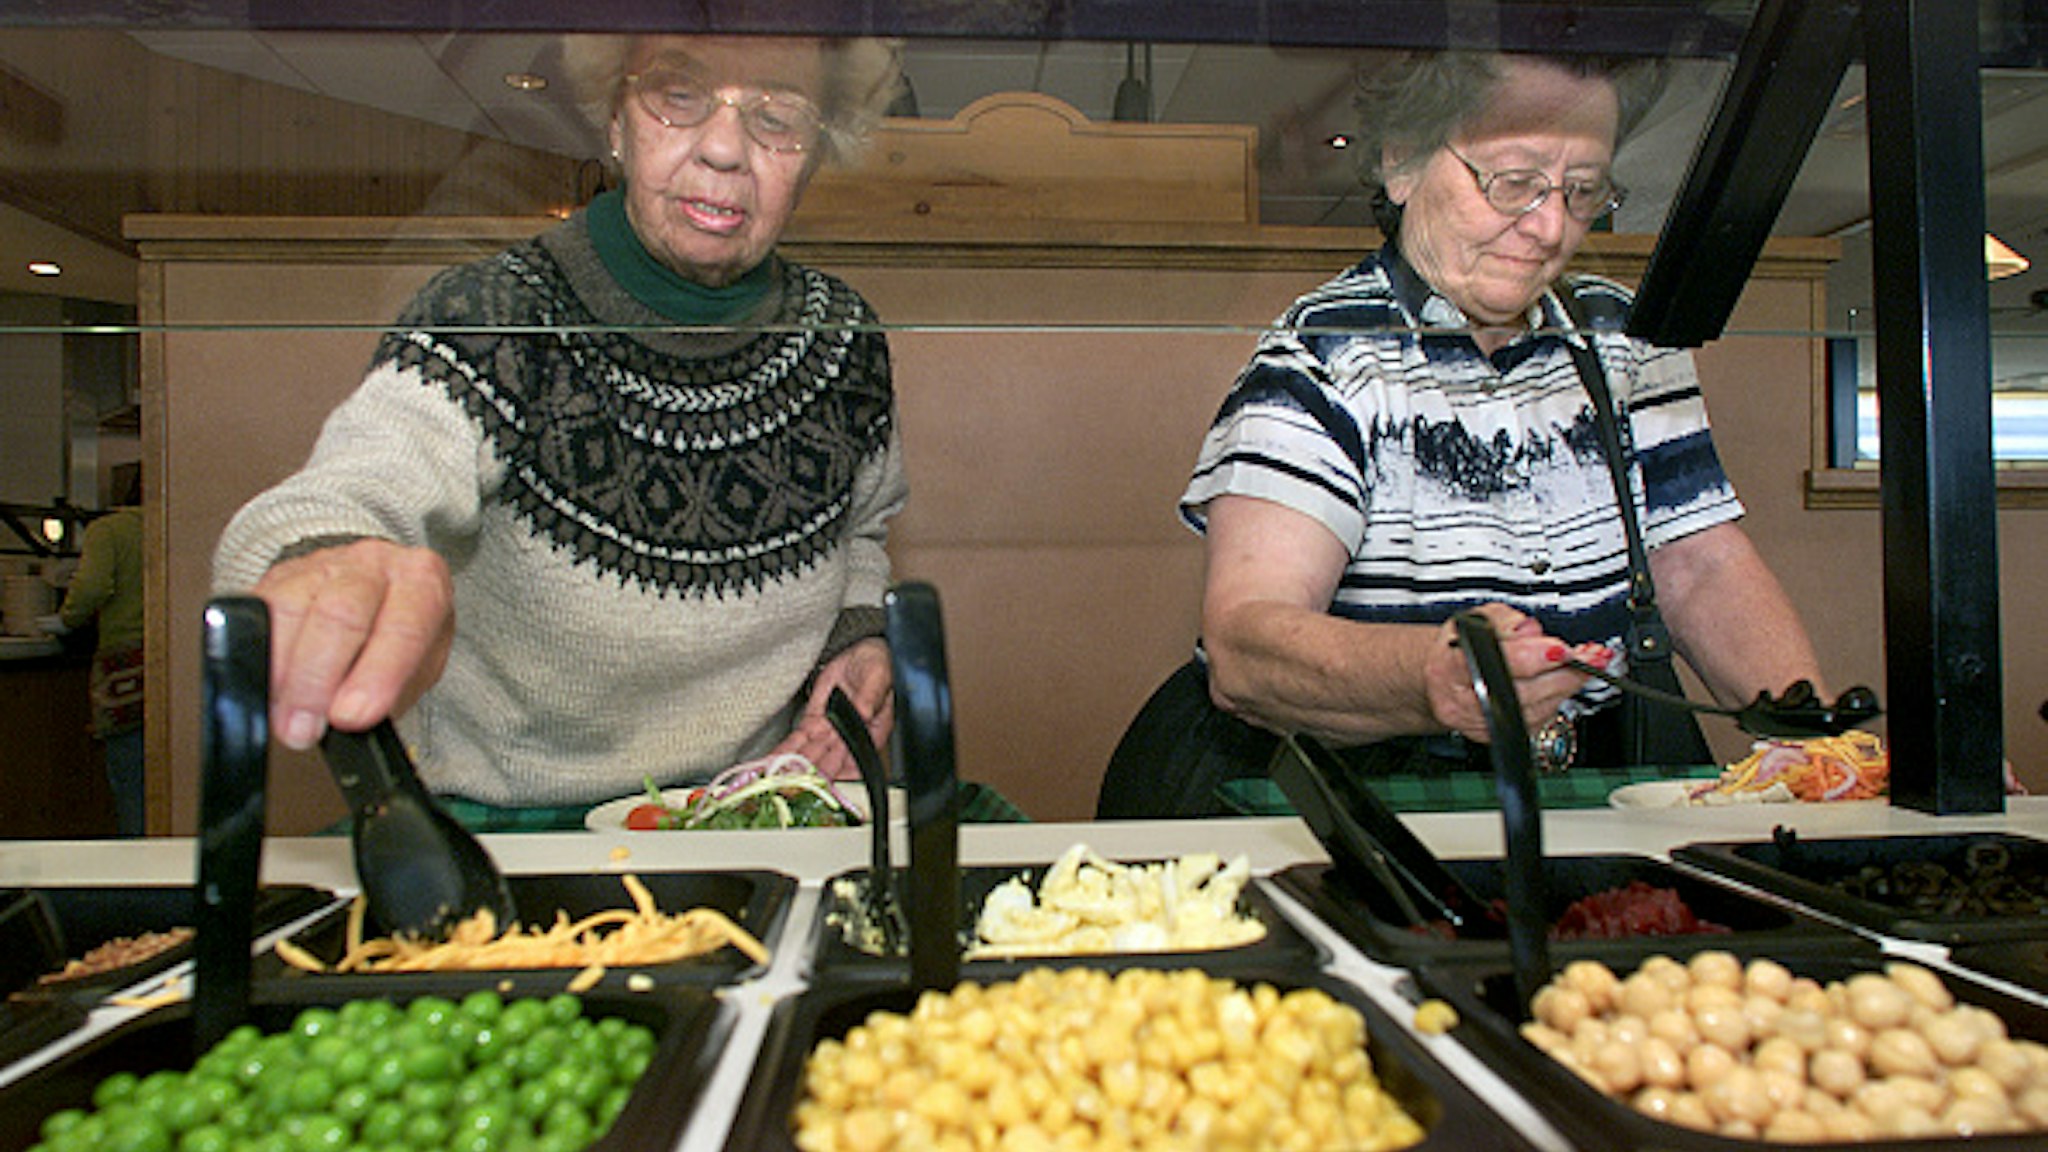 June Ross, left, from Lancaster, and friend Barbara Murray, from Victorville, fill their plates up while visiting the salad bar at Souplantation in Camarillo. Digital image taken on 05/09/03